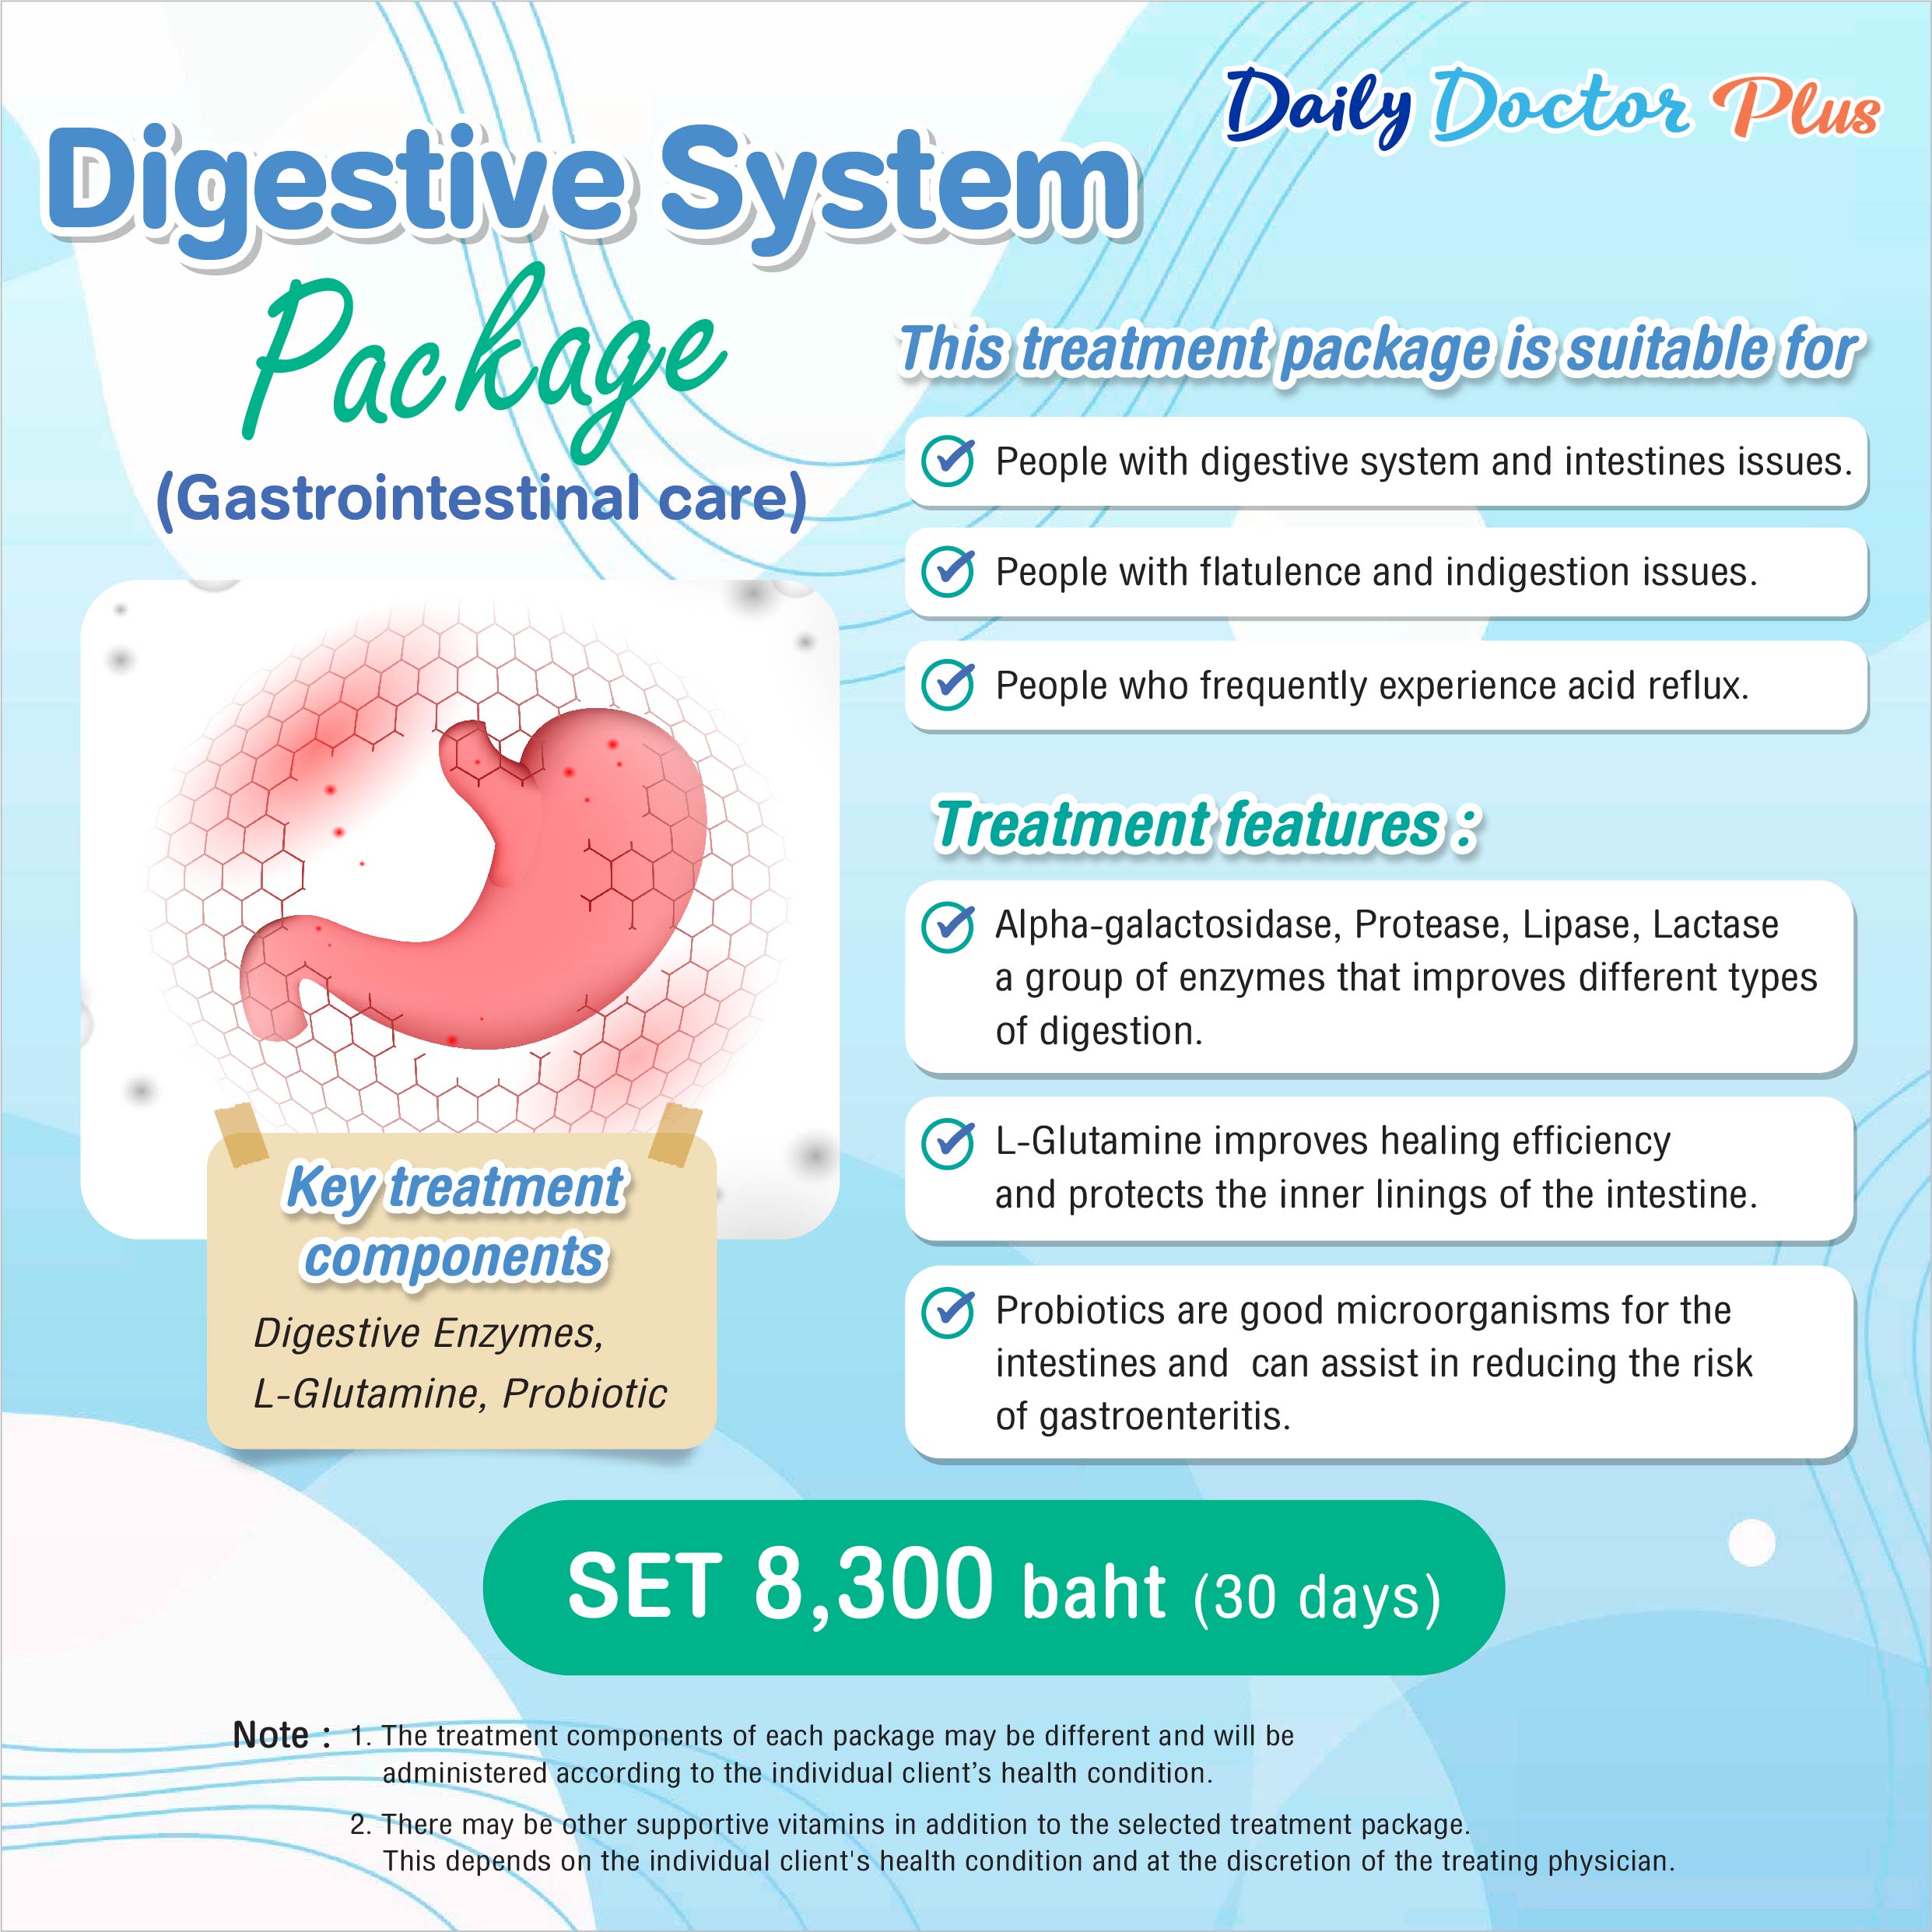 Daily Doctor Plus : Digestive System